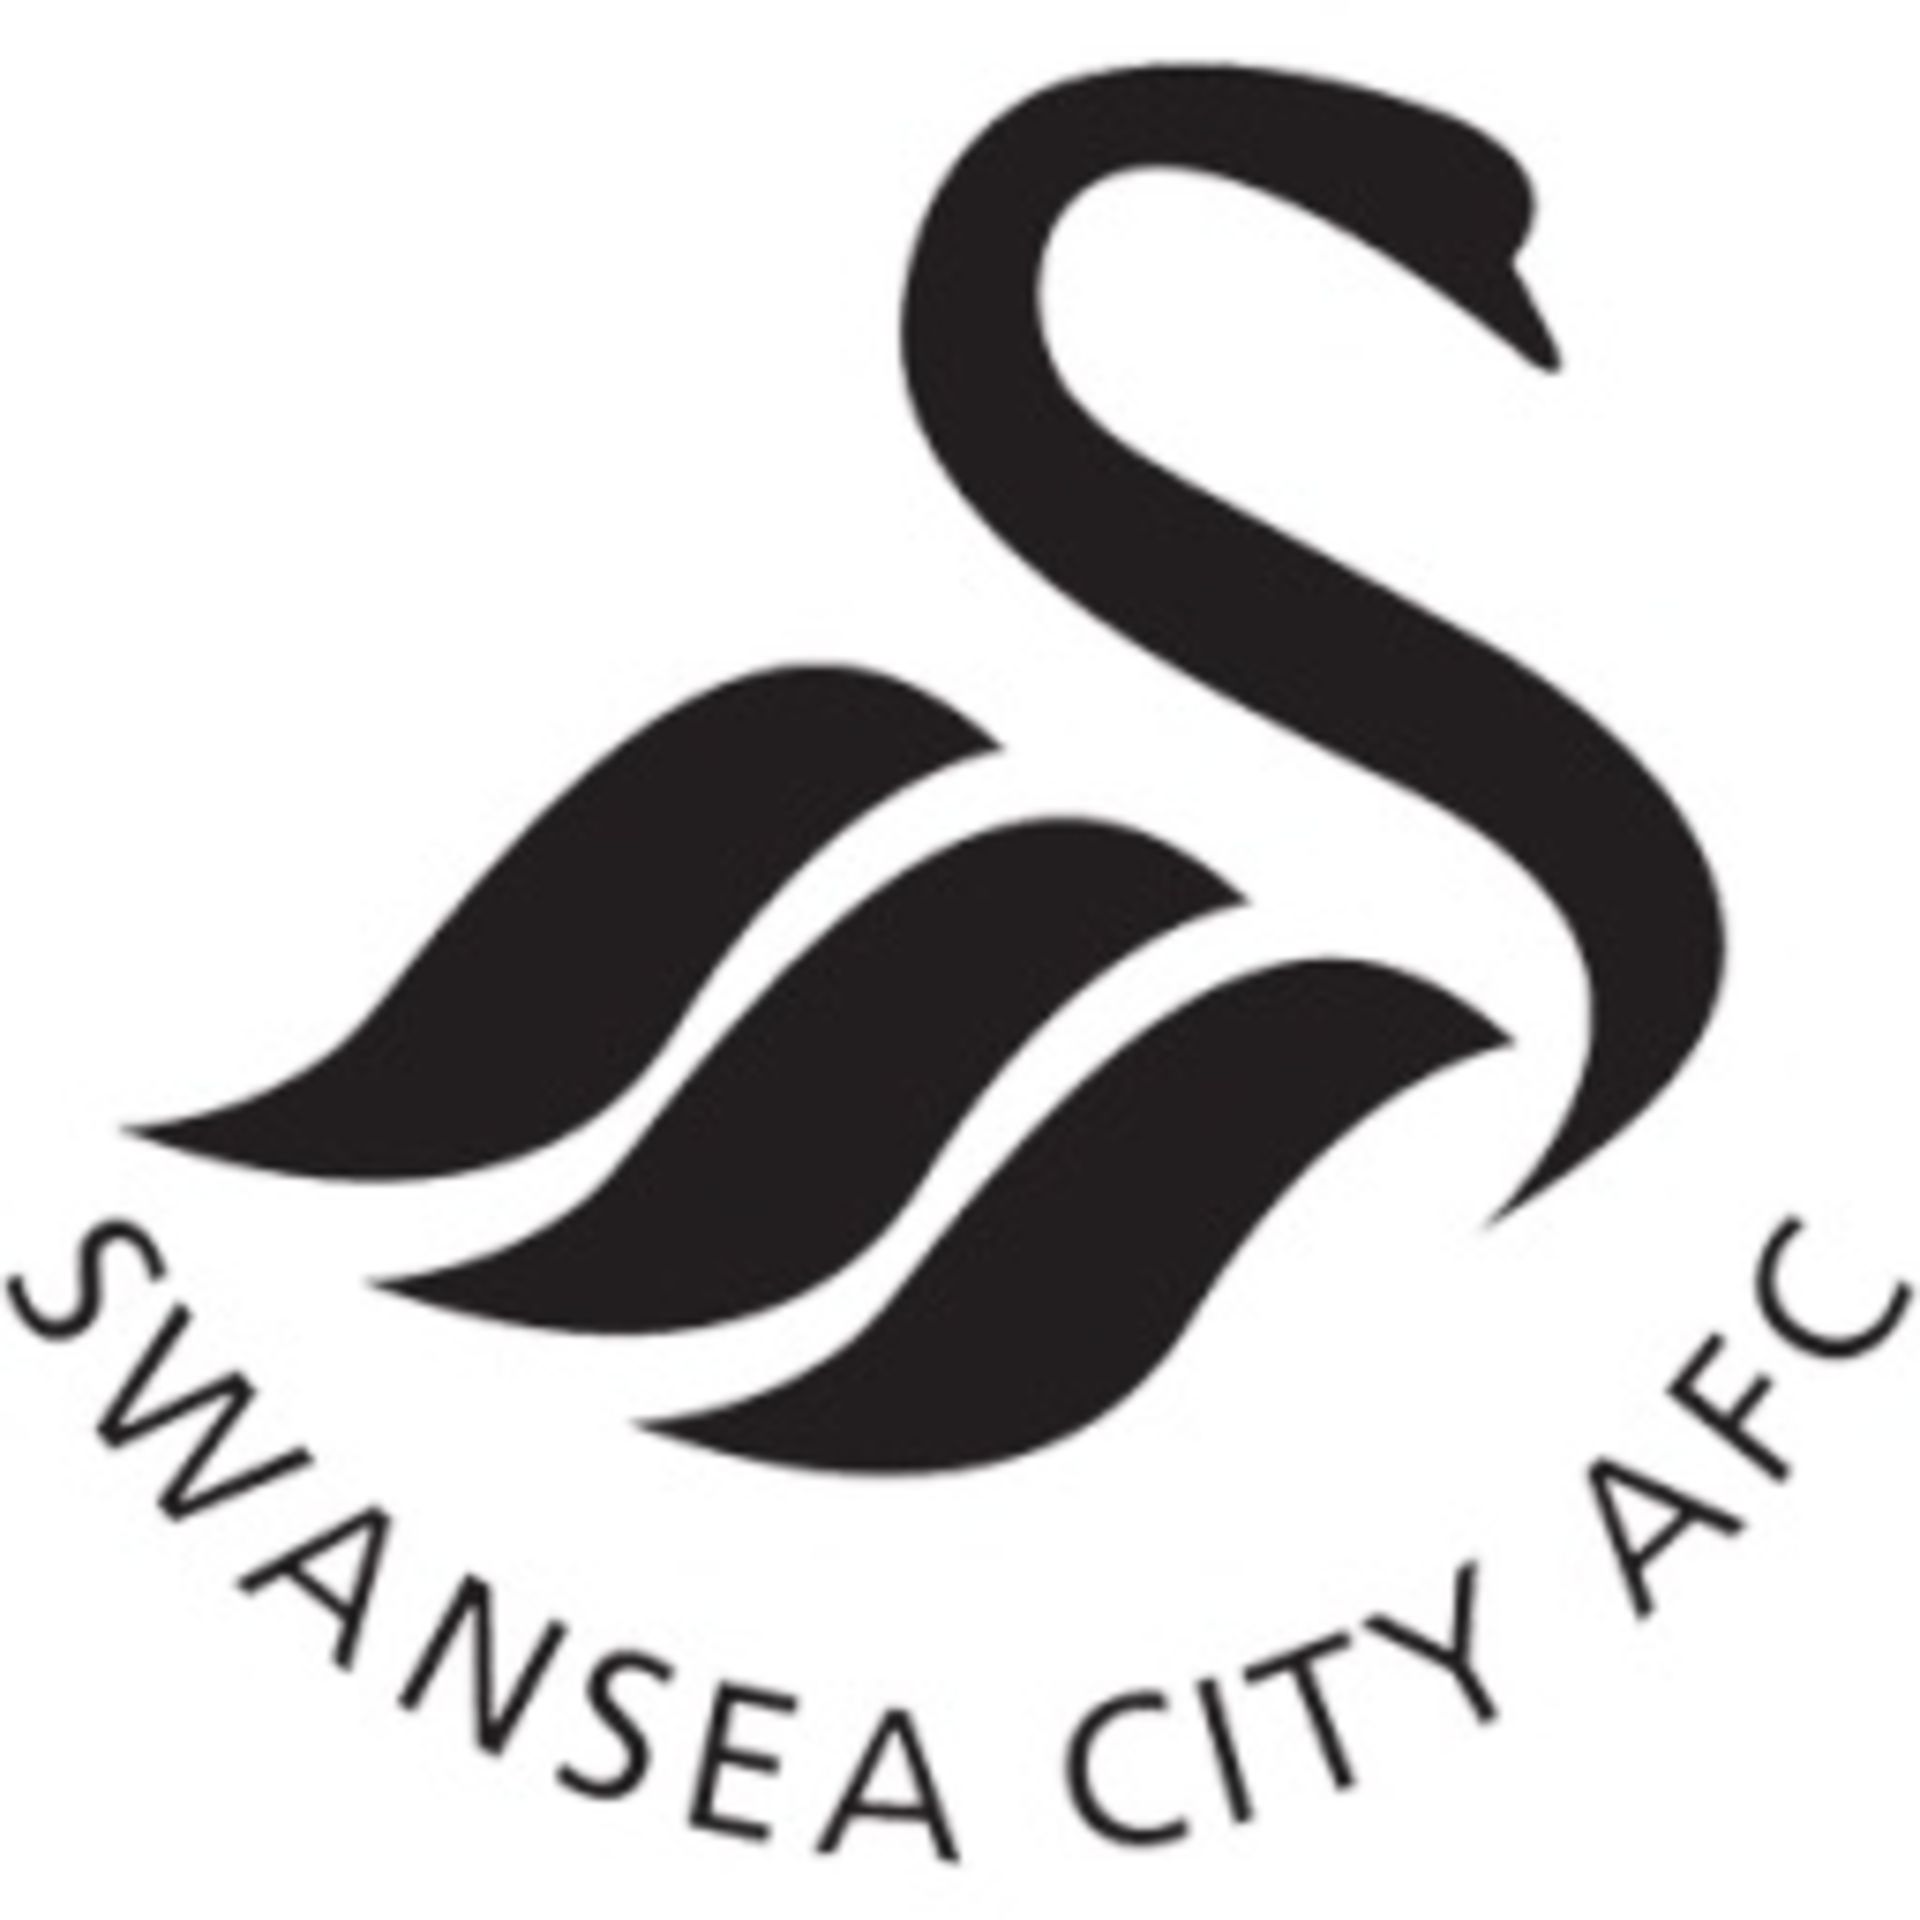 Swansea City Premier League matchday experience for two people including meeting manager & players - Image 4 of 4